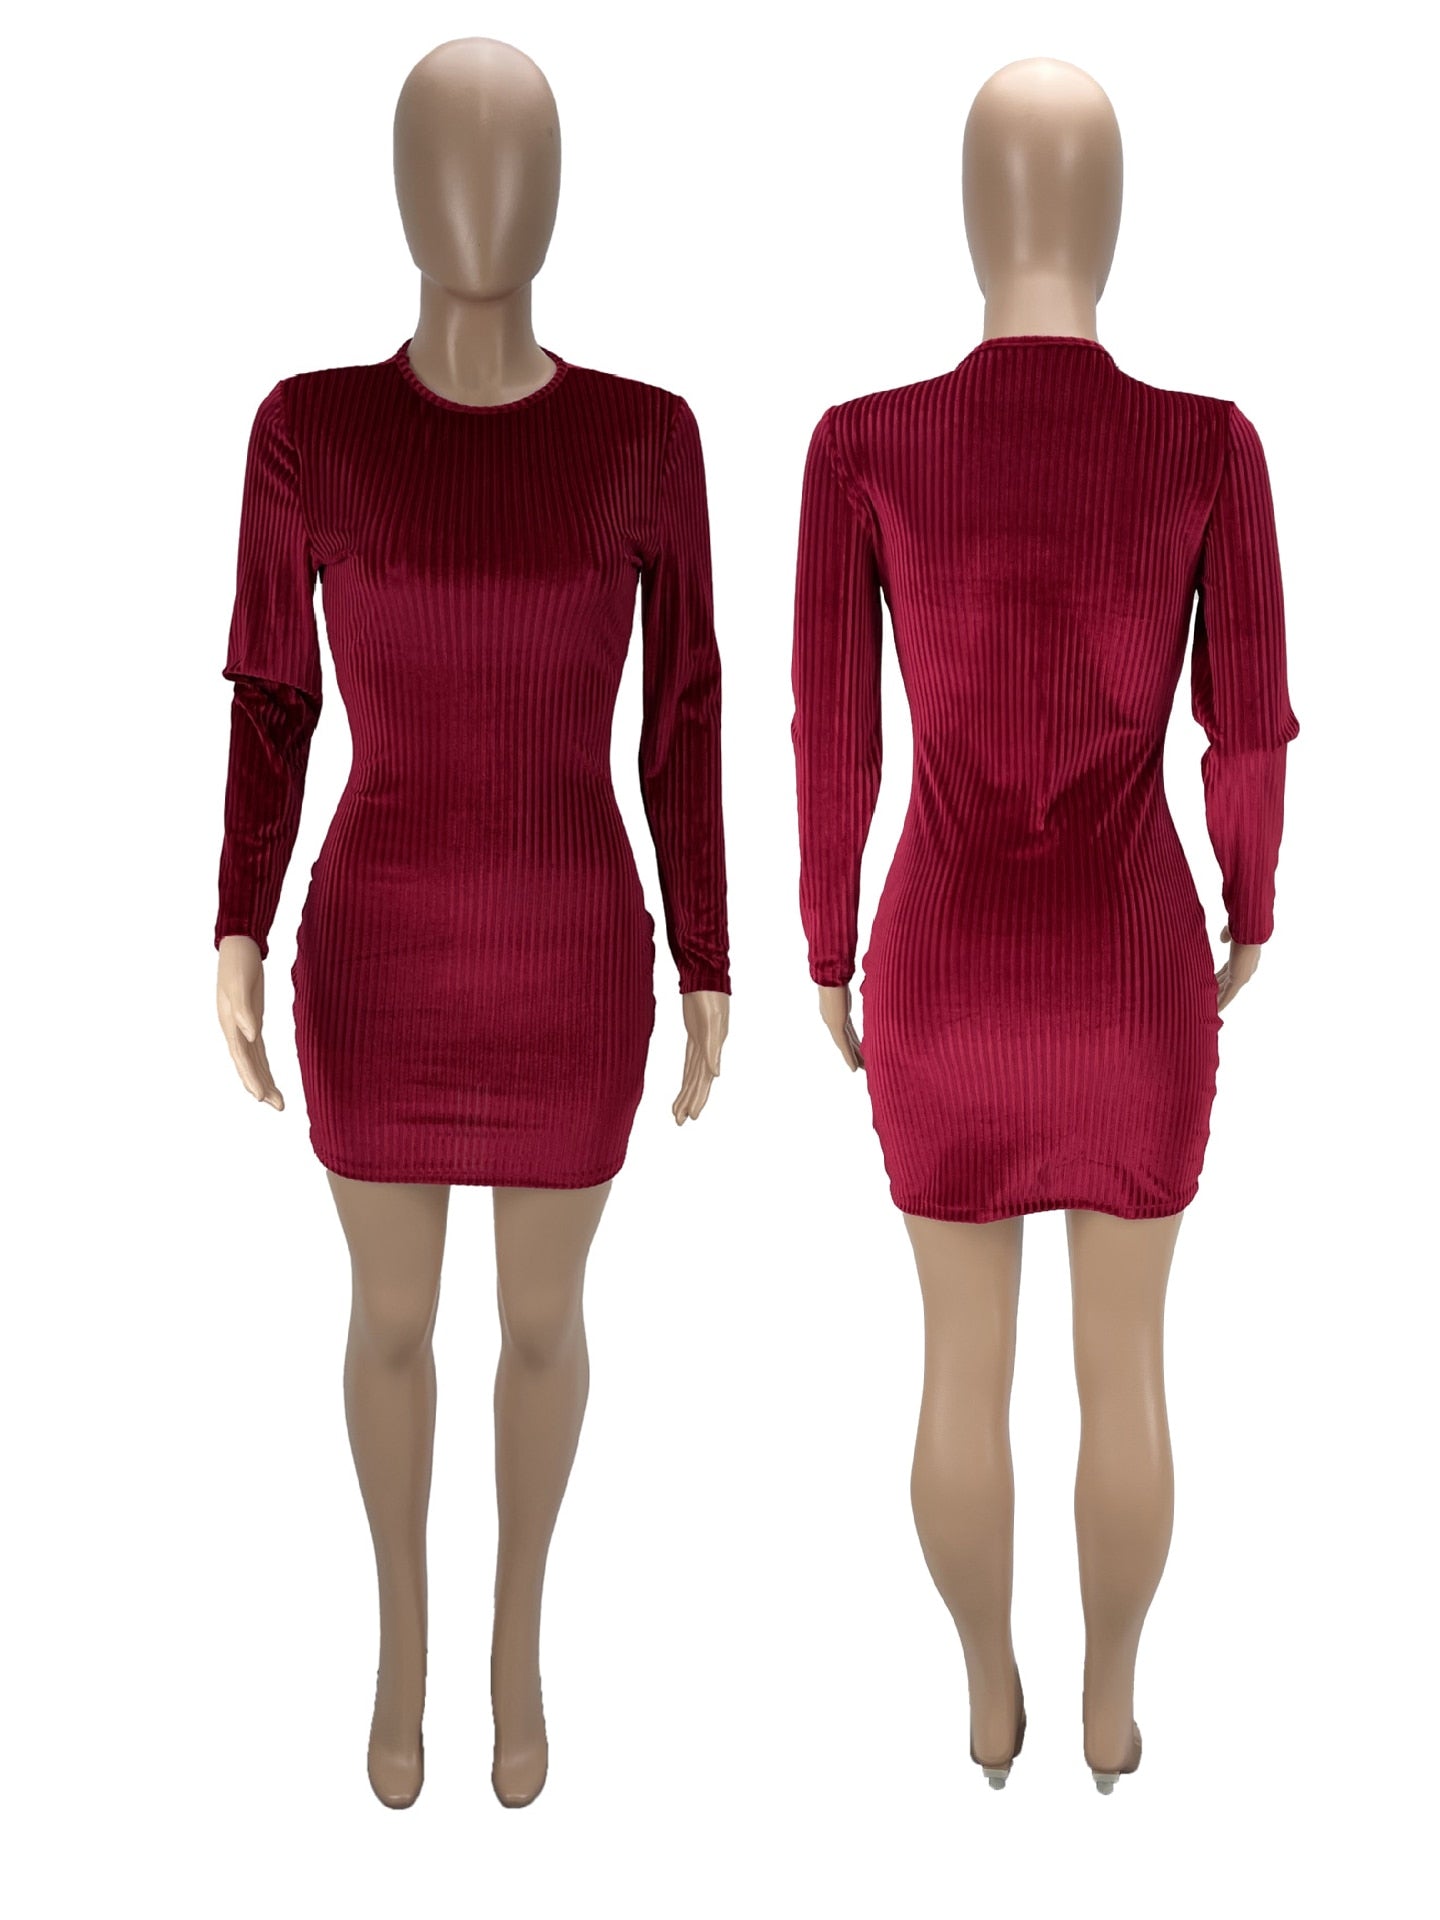 red long sleeve bodycon dress